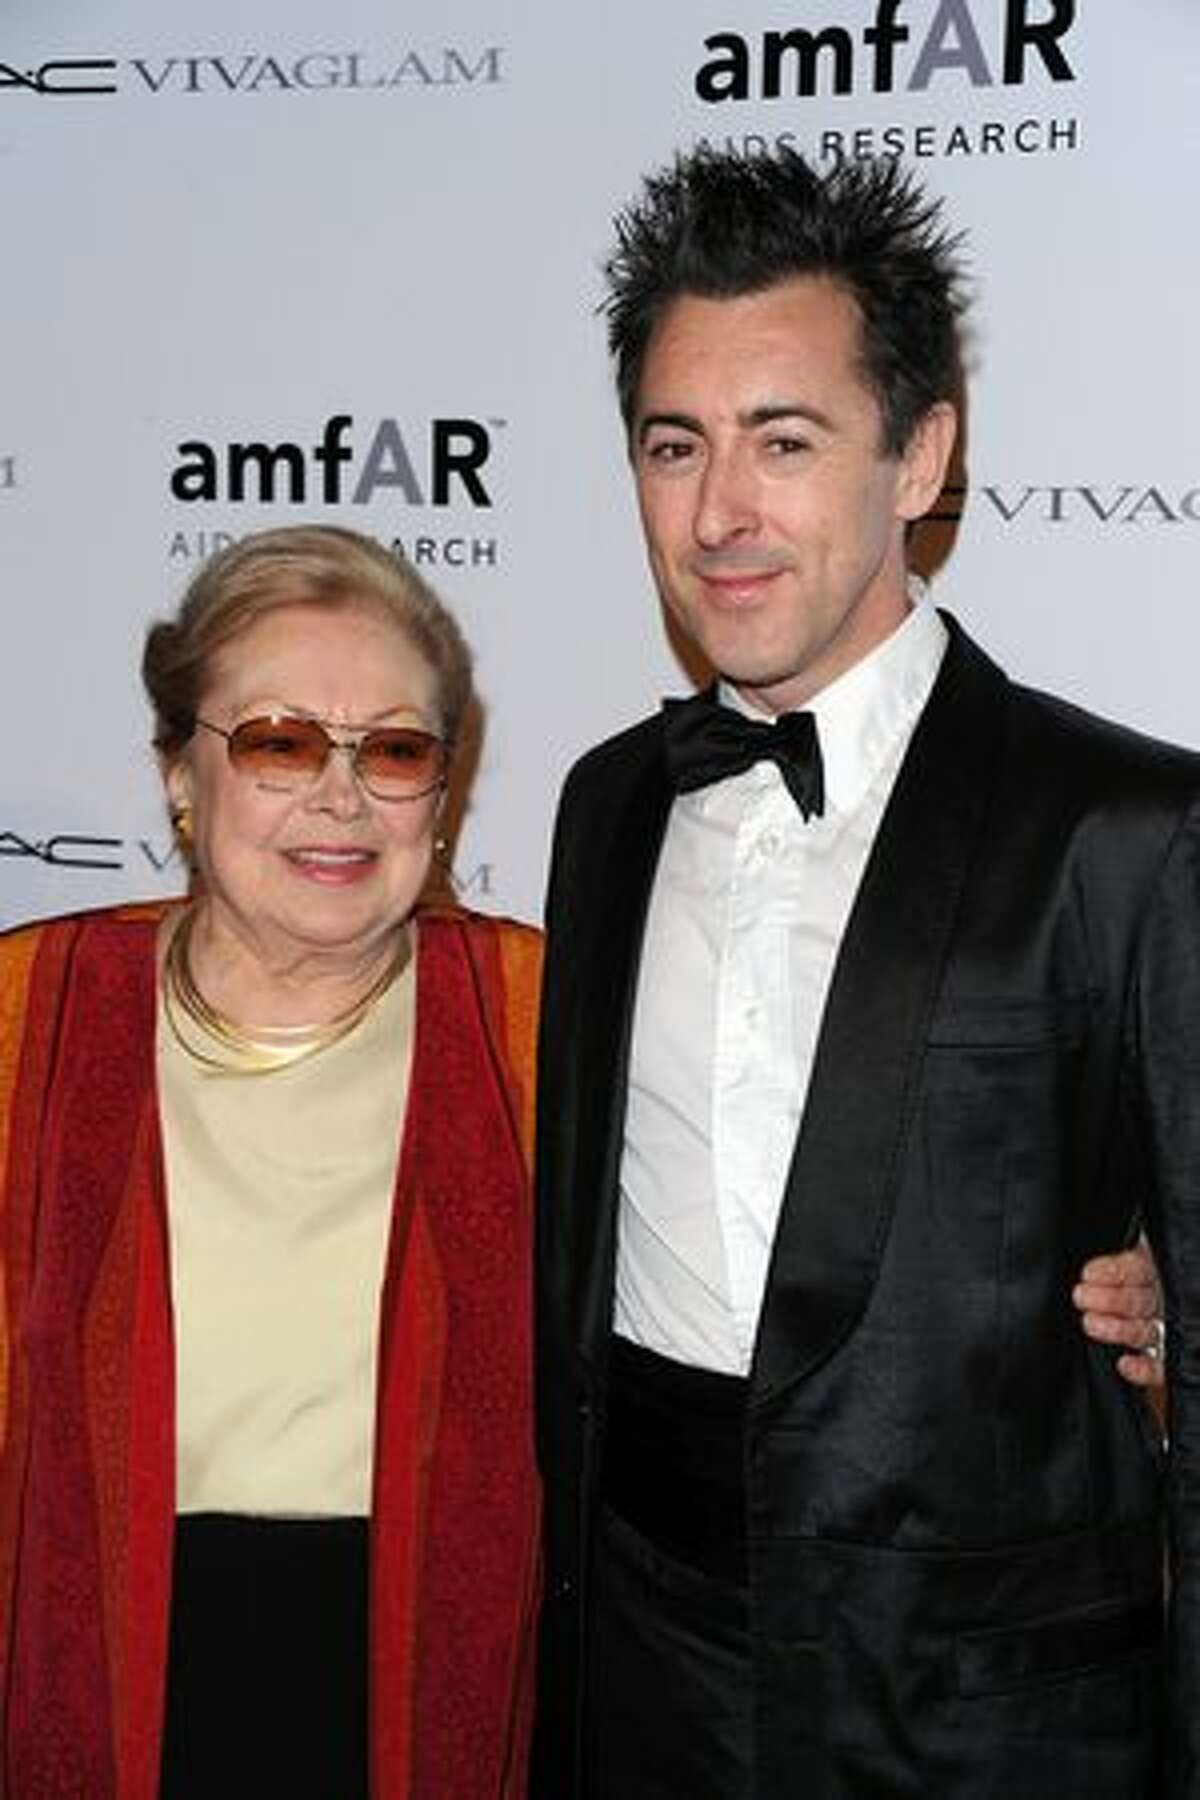 Dr. Mathilde Krim and actor Alan Cumming attend the amfAR New York Gala co-sponsored by M.A.C. Cosmetics to Kick Off Fall 2010 Fashion Week at Cipriani 42nd Street in New York, New York.